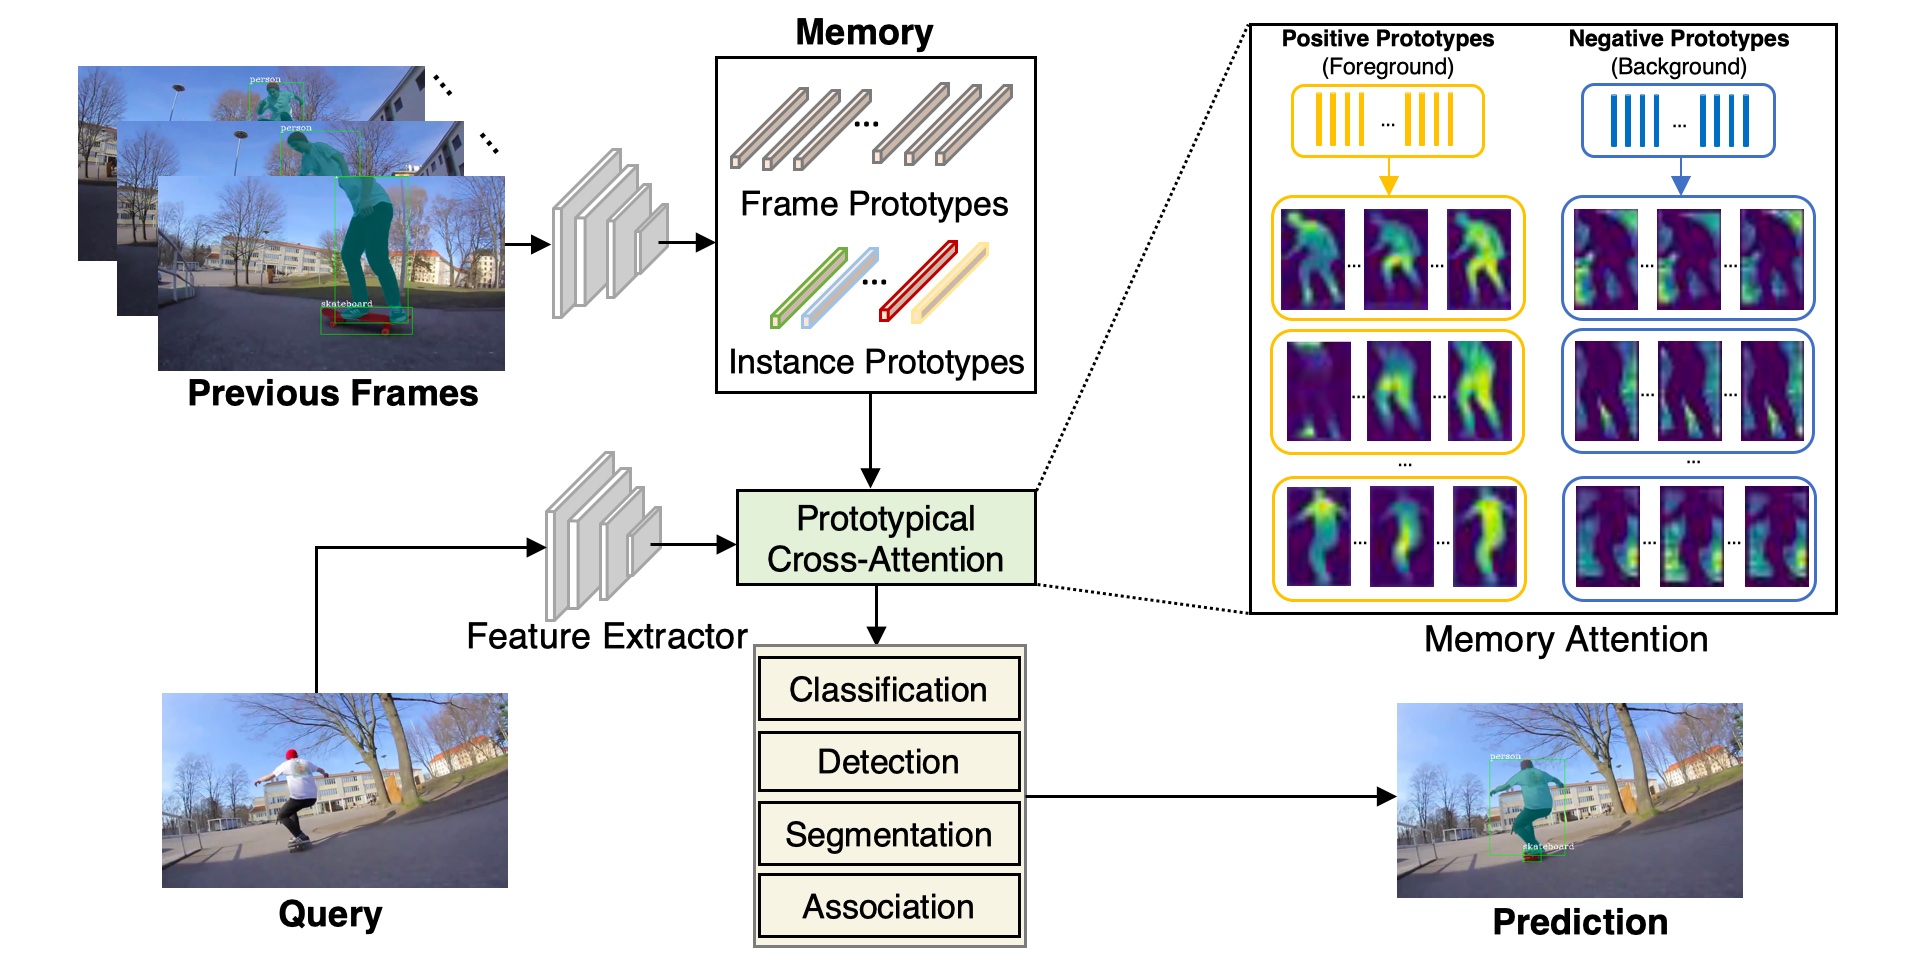 Prototypical Cross-Attention Networks for Multiple Object Tracking and Segmentation